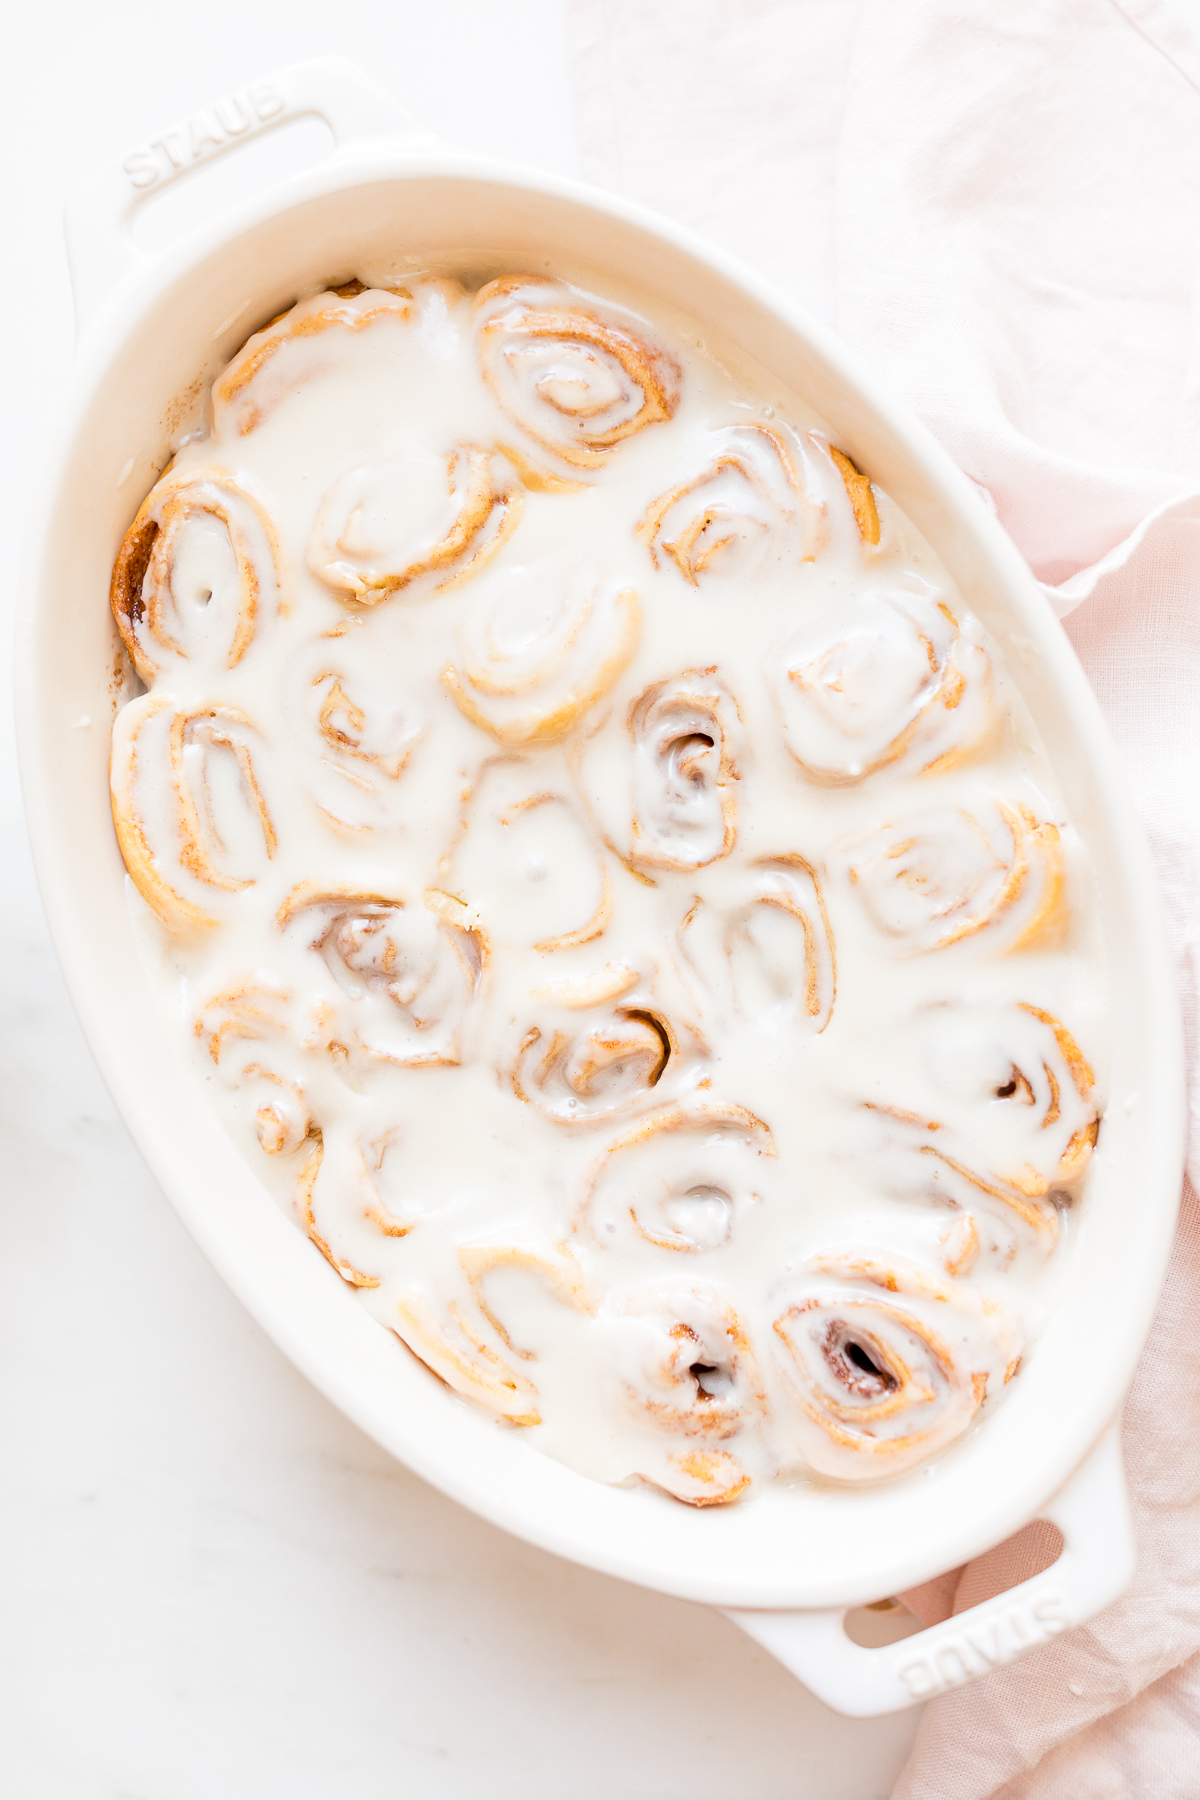 Cinnamon rolls made with crescent rolls in a white oval dish.